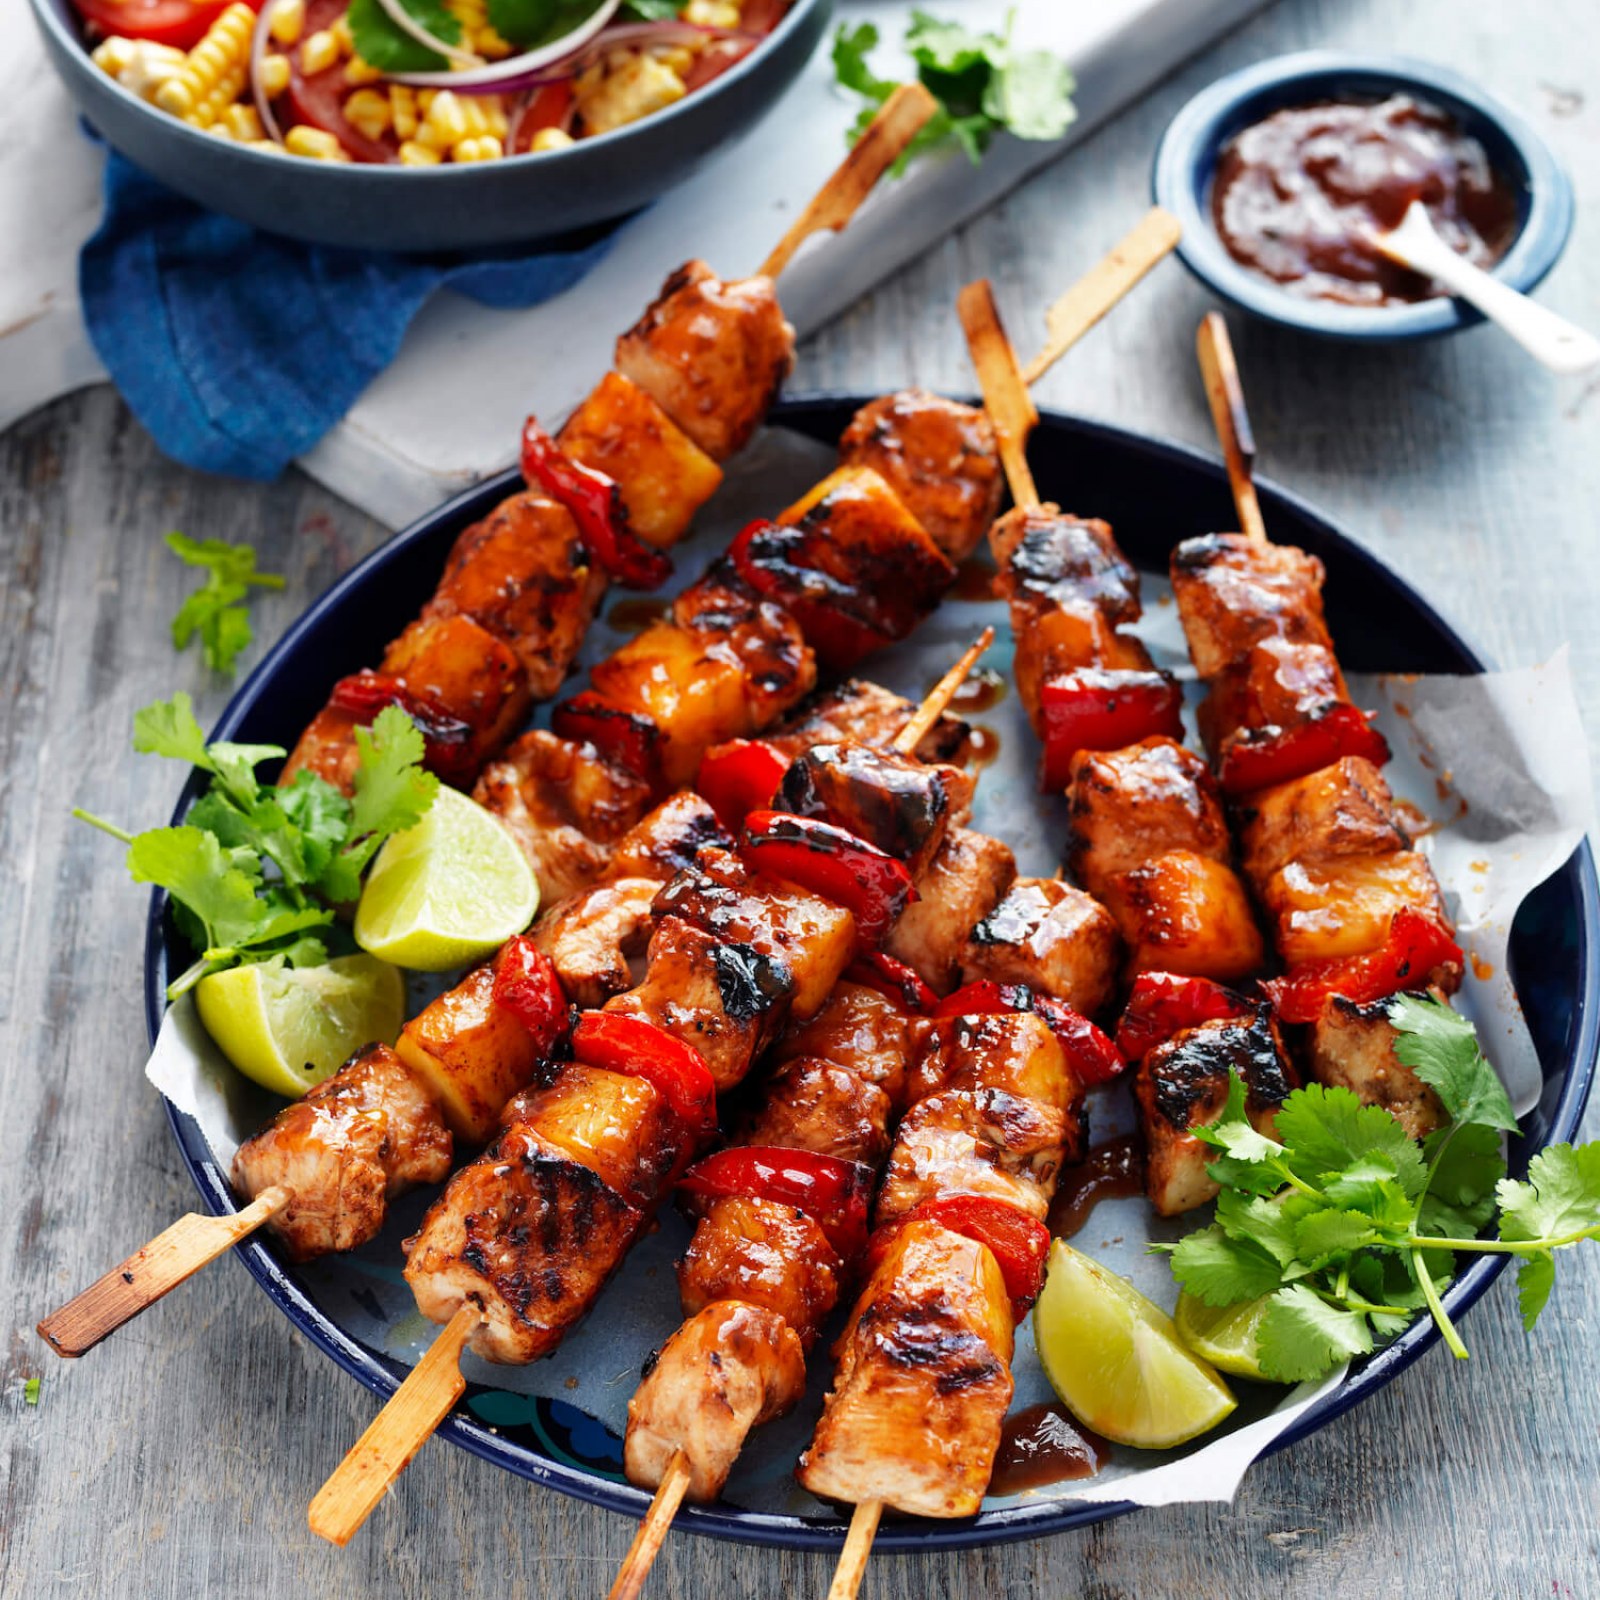 How to make BBQ skewers | Cook Free Recipes from Australia\'s Best Brands |  myfoodbook